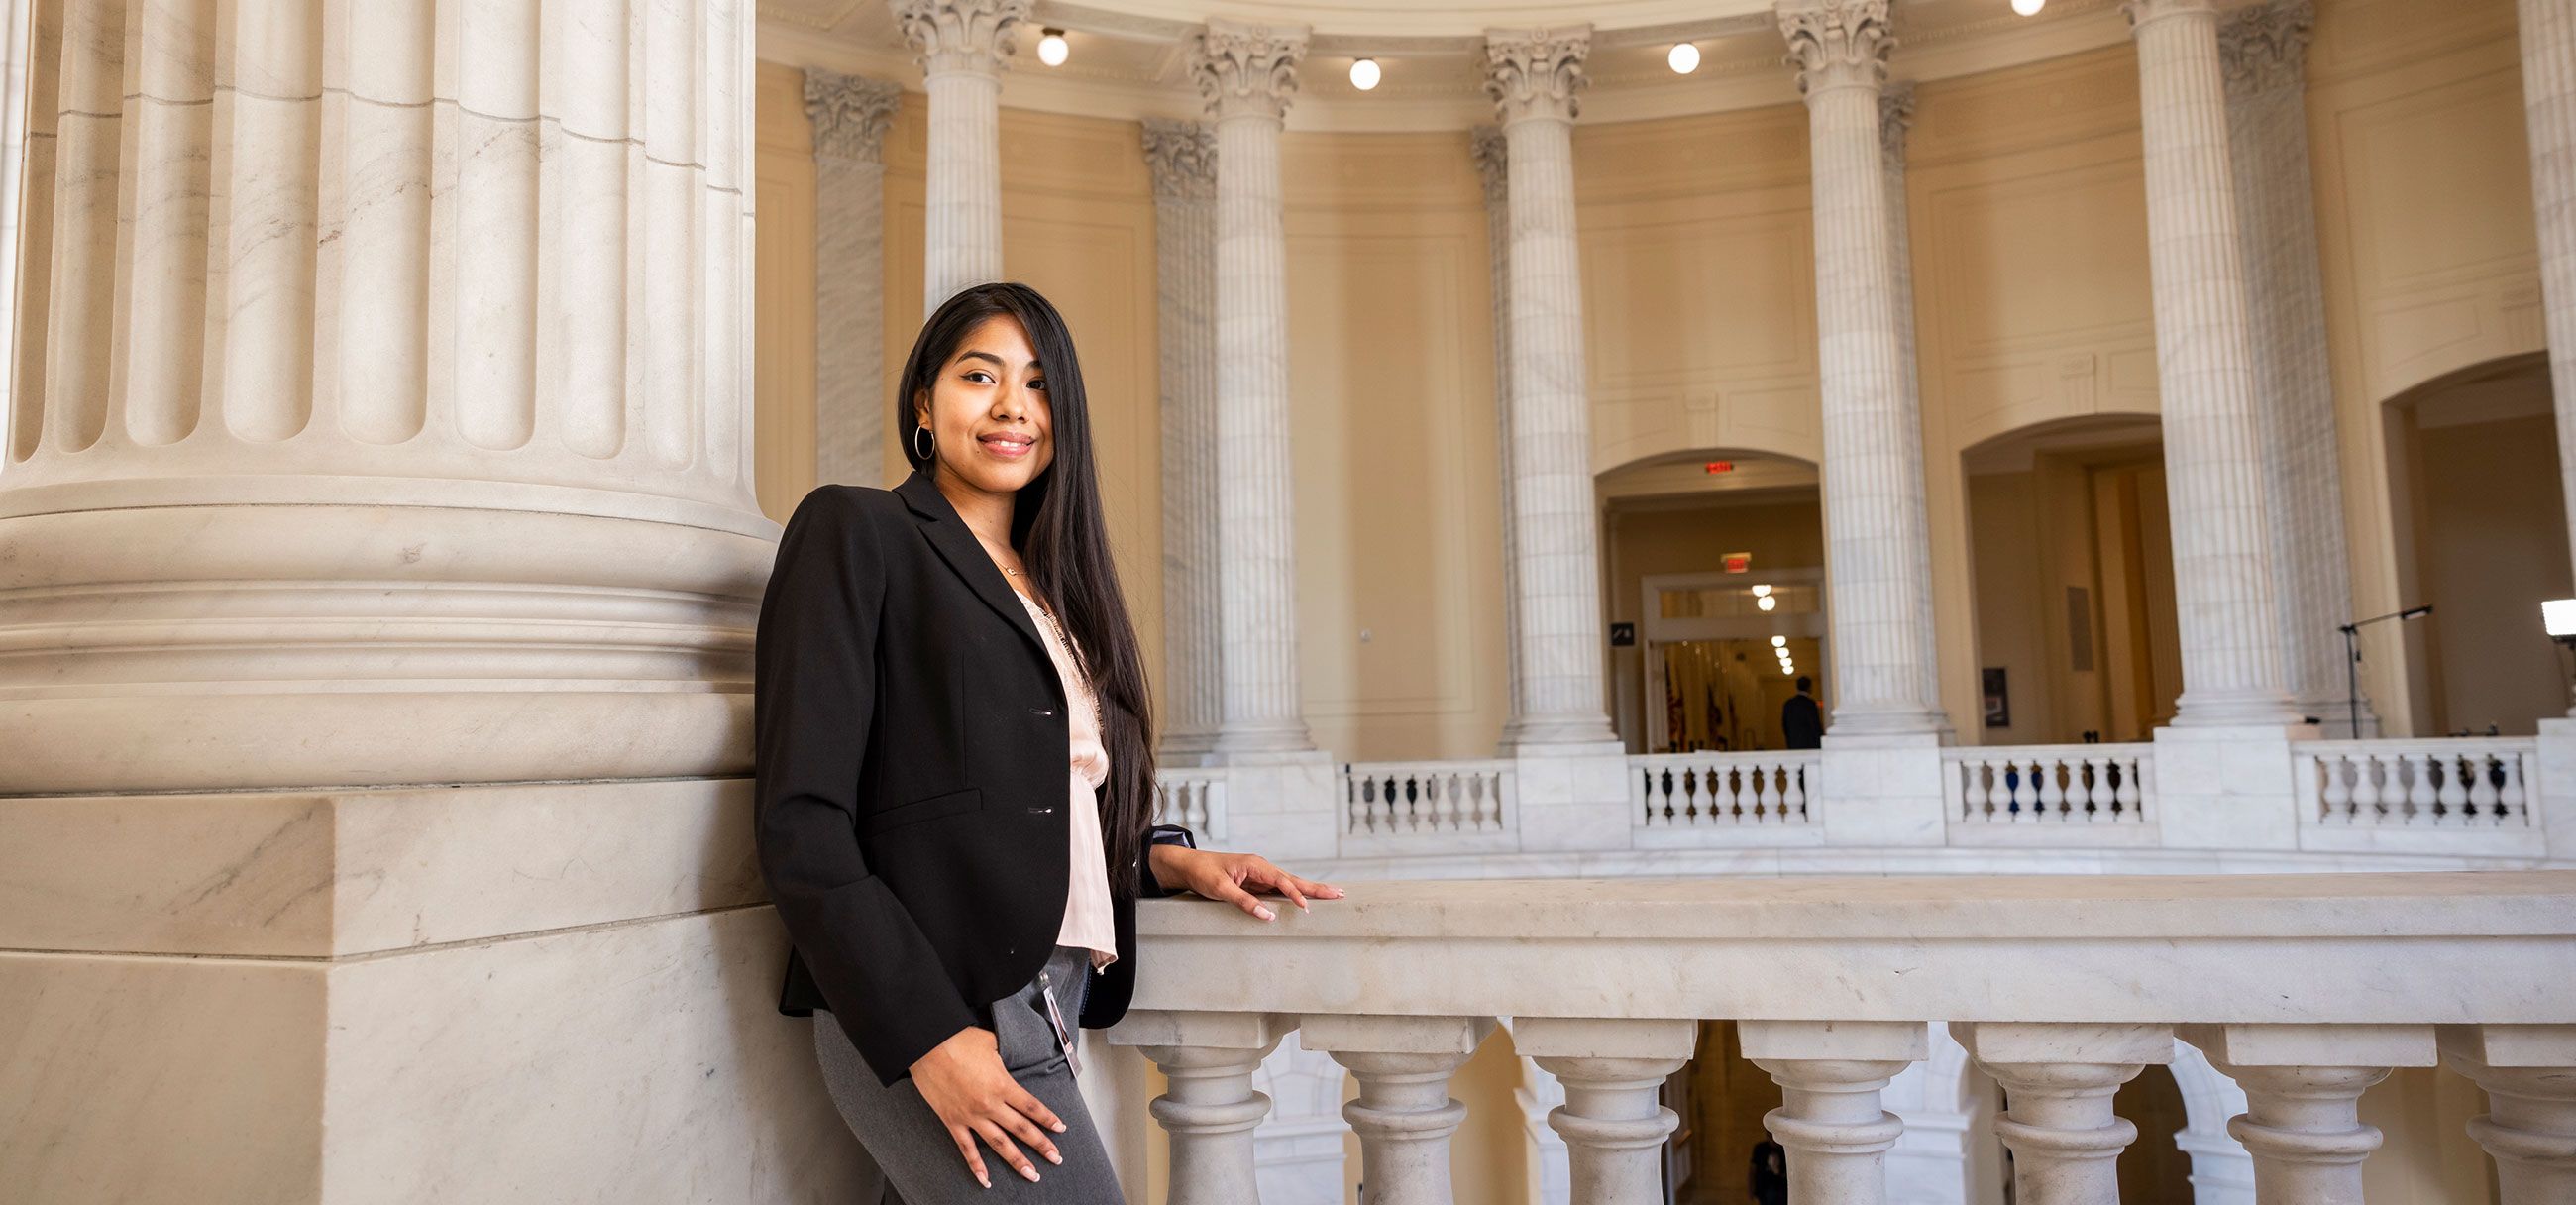 Mason student Mirella Guzman-Escobar, studying Graphic Design at the School of Art, interned at House Creative Services, Chief Administrative Officer at the U.S. House of Representatives in Washington D.C. Photo by: Ron Aira/Creative Services/George Mason University